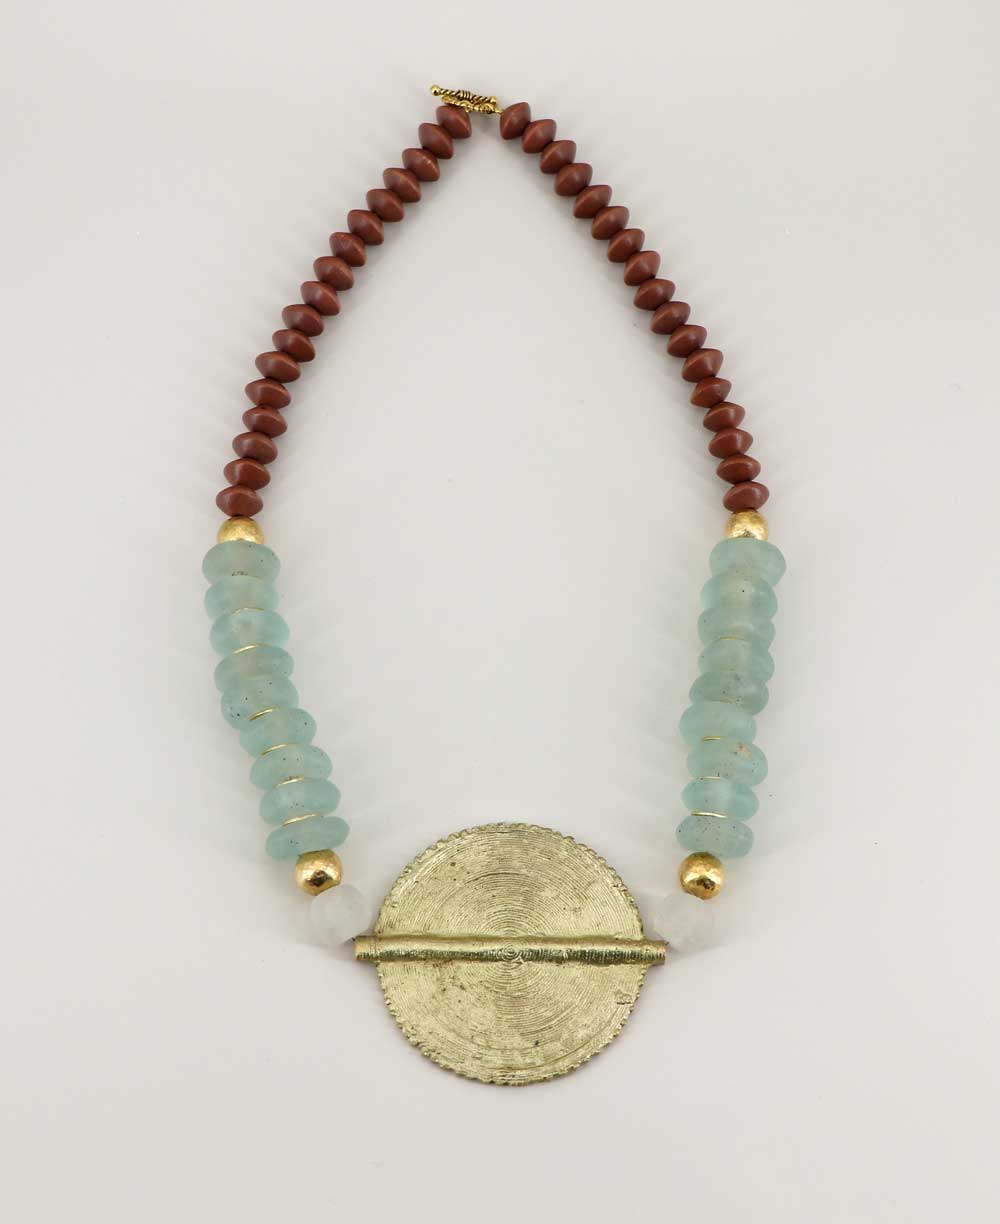 Artisan brass medallion and wood bead necklace